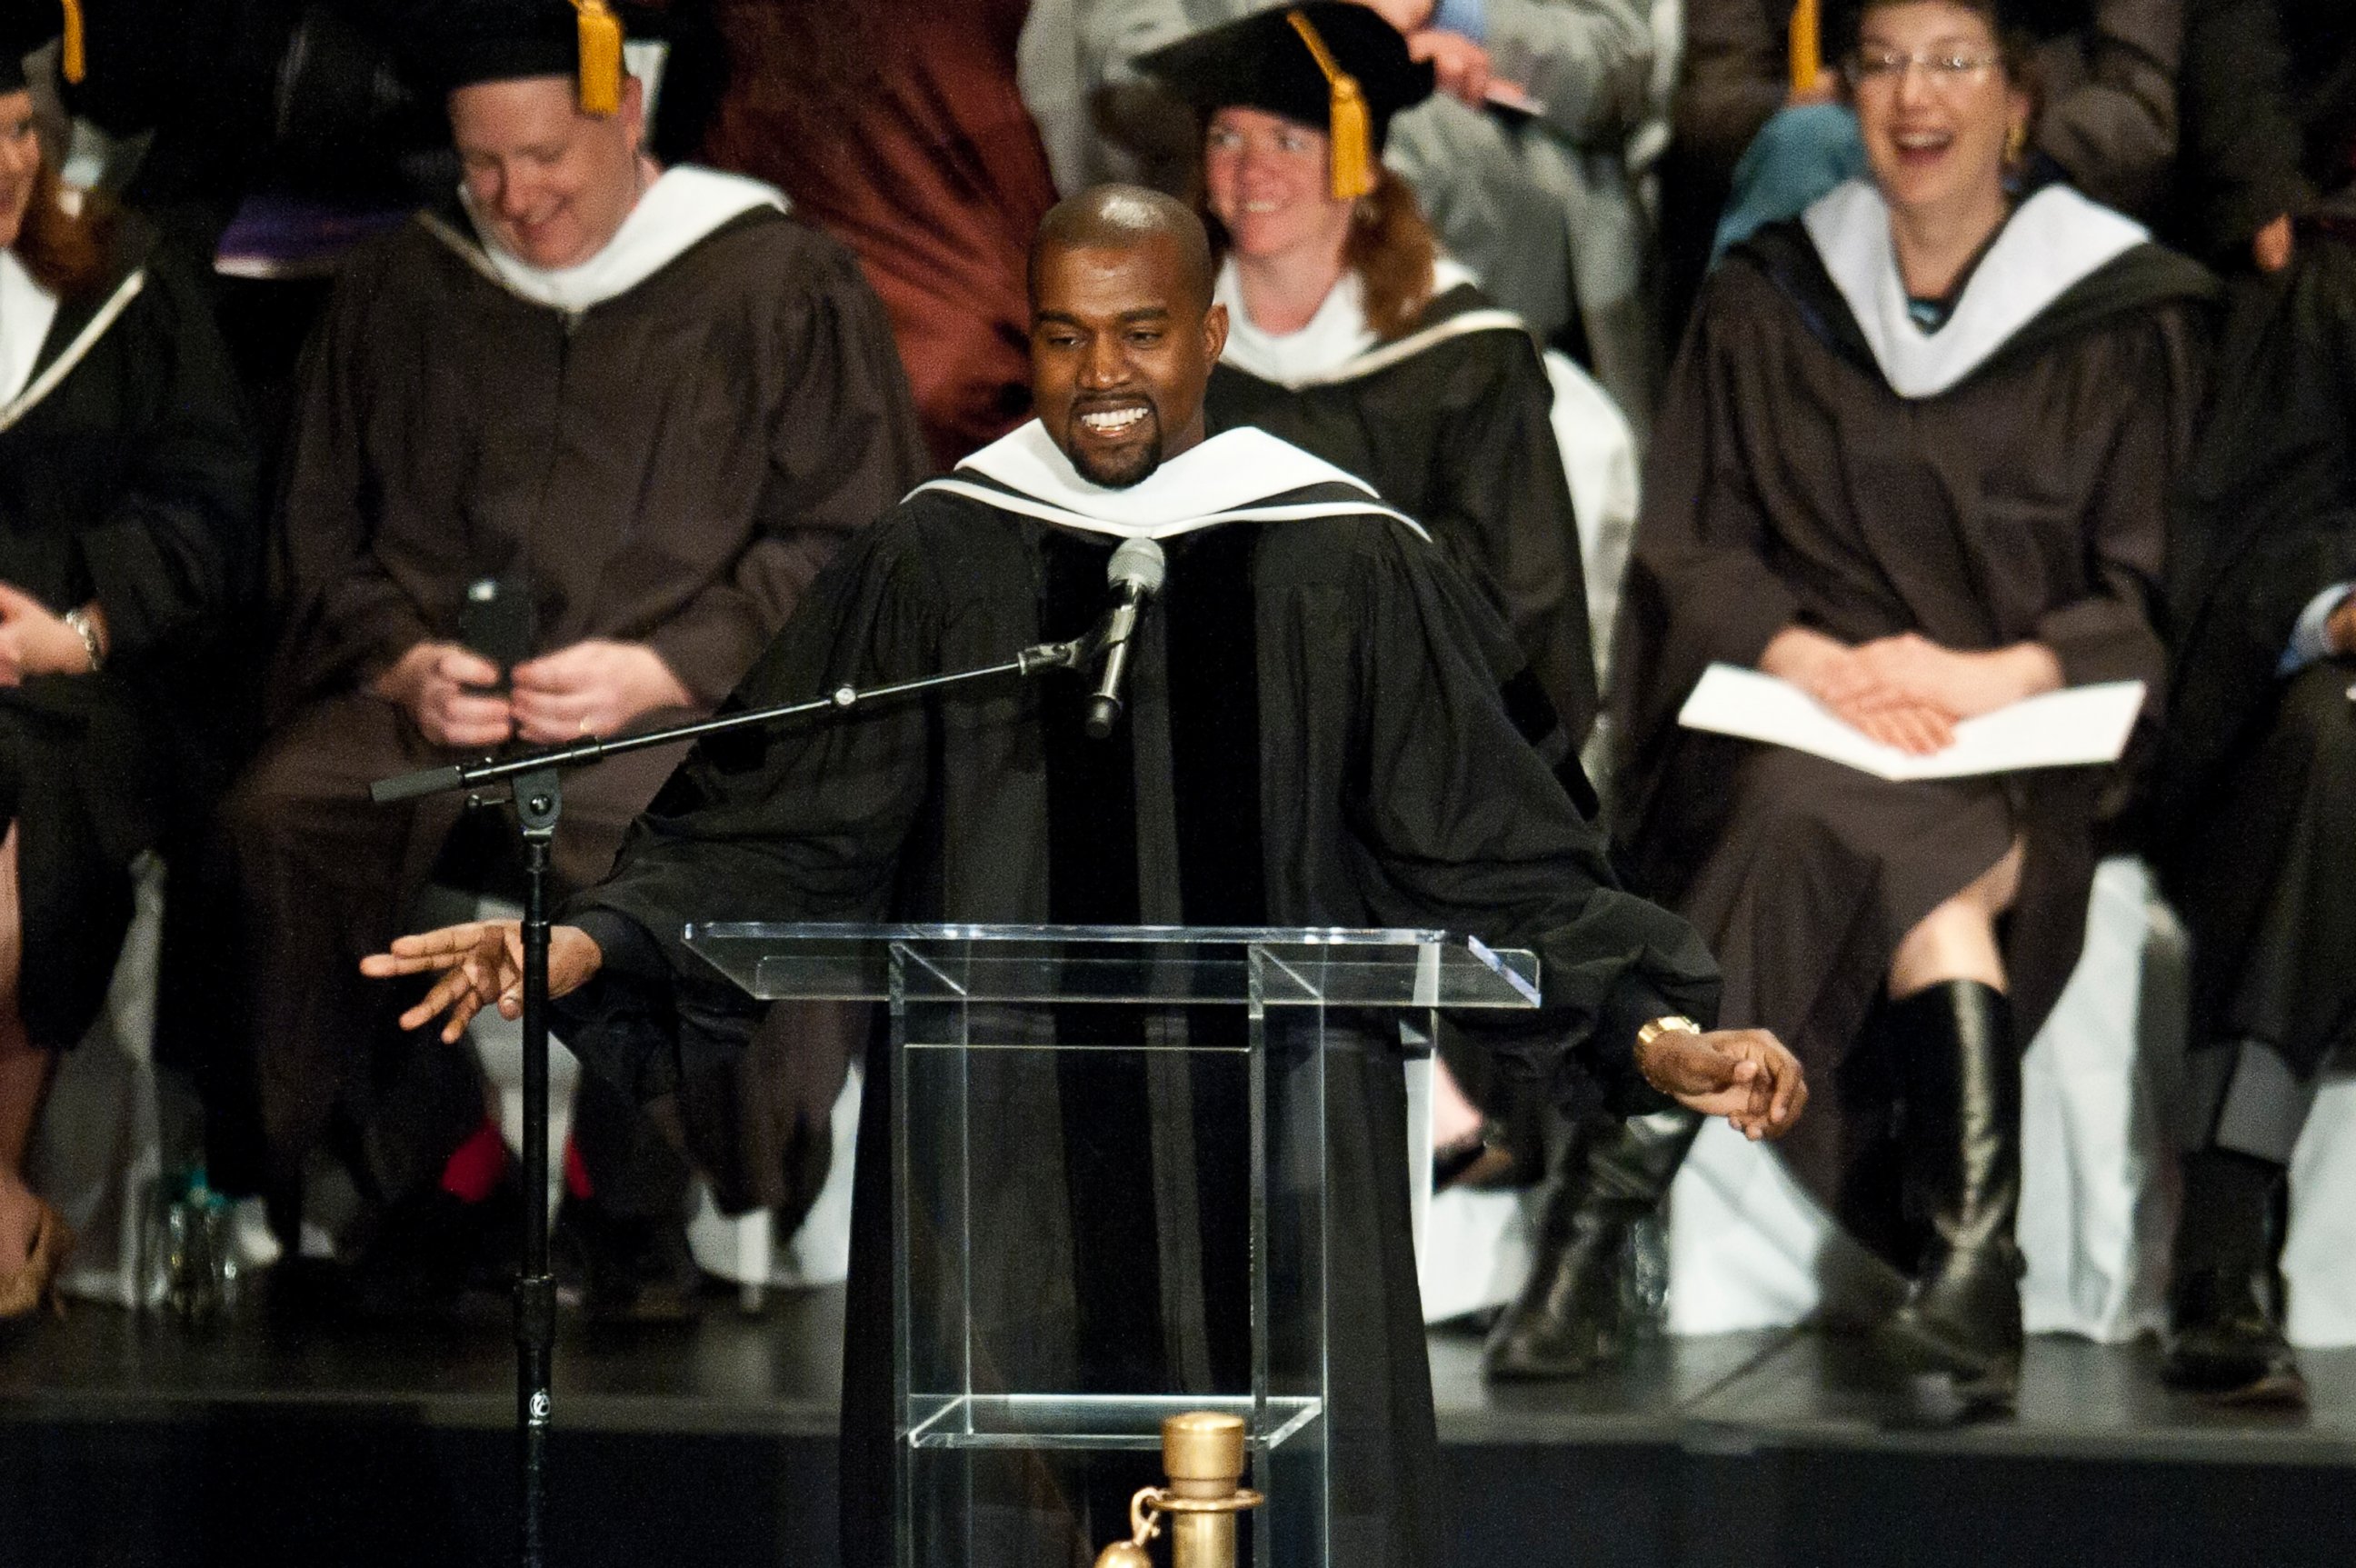 PHOTO: Kanye West receives an honorary doctorate at the School Of Art Institute Of Chicago commencement ceremony on May 11, 2015 in Chicago, Illinois. 